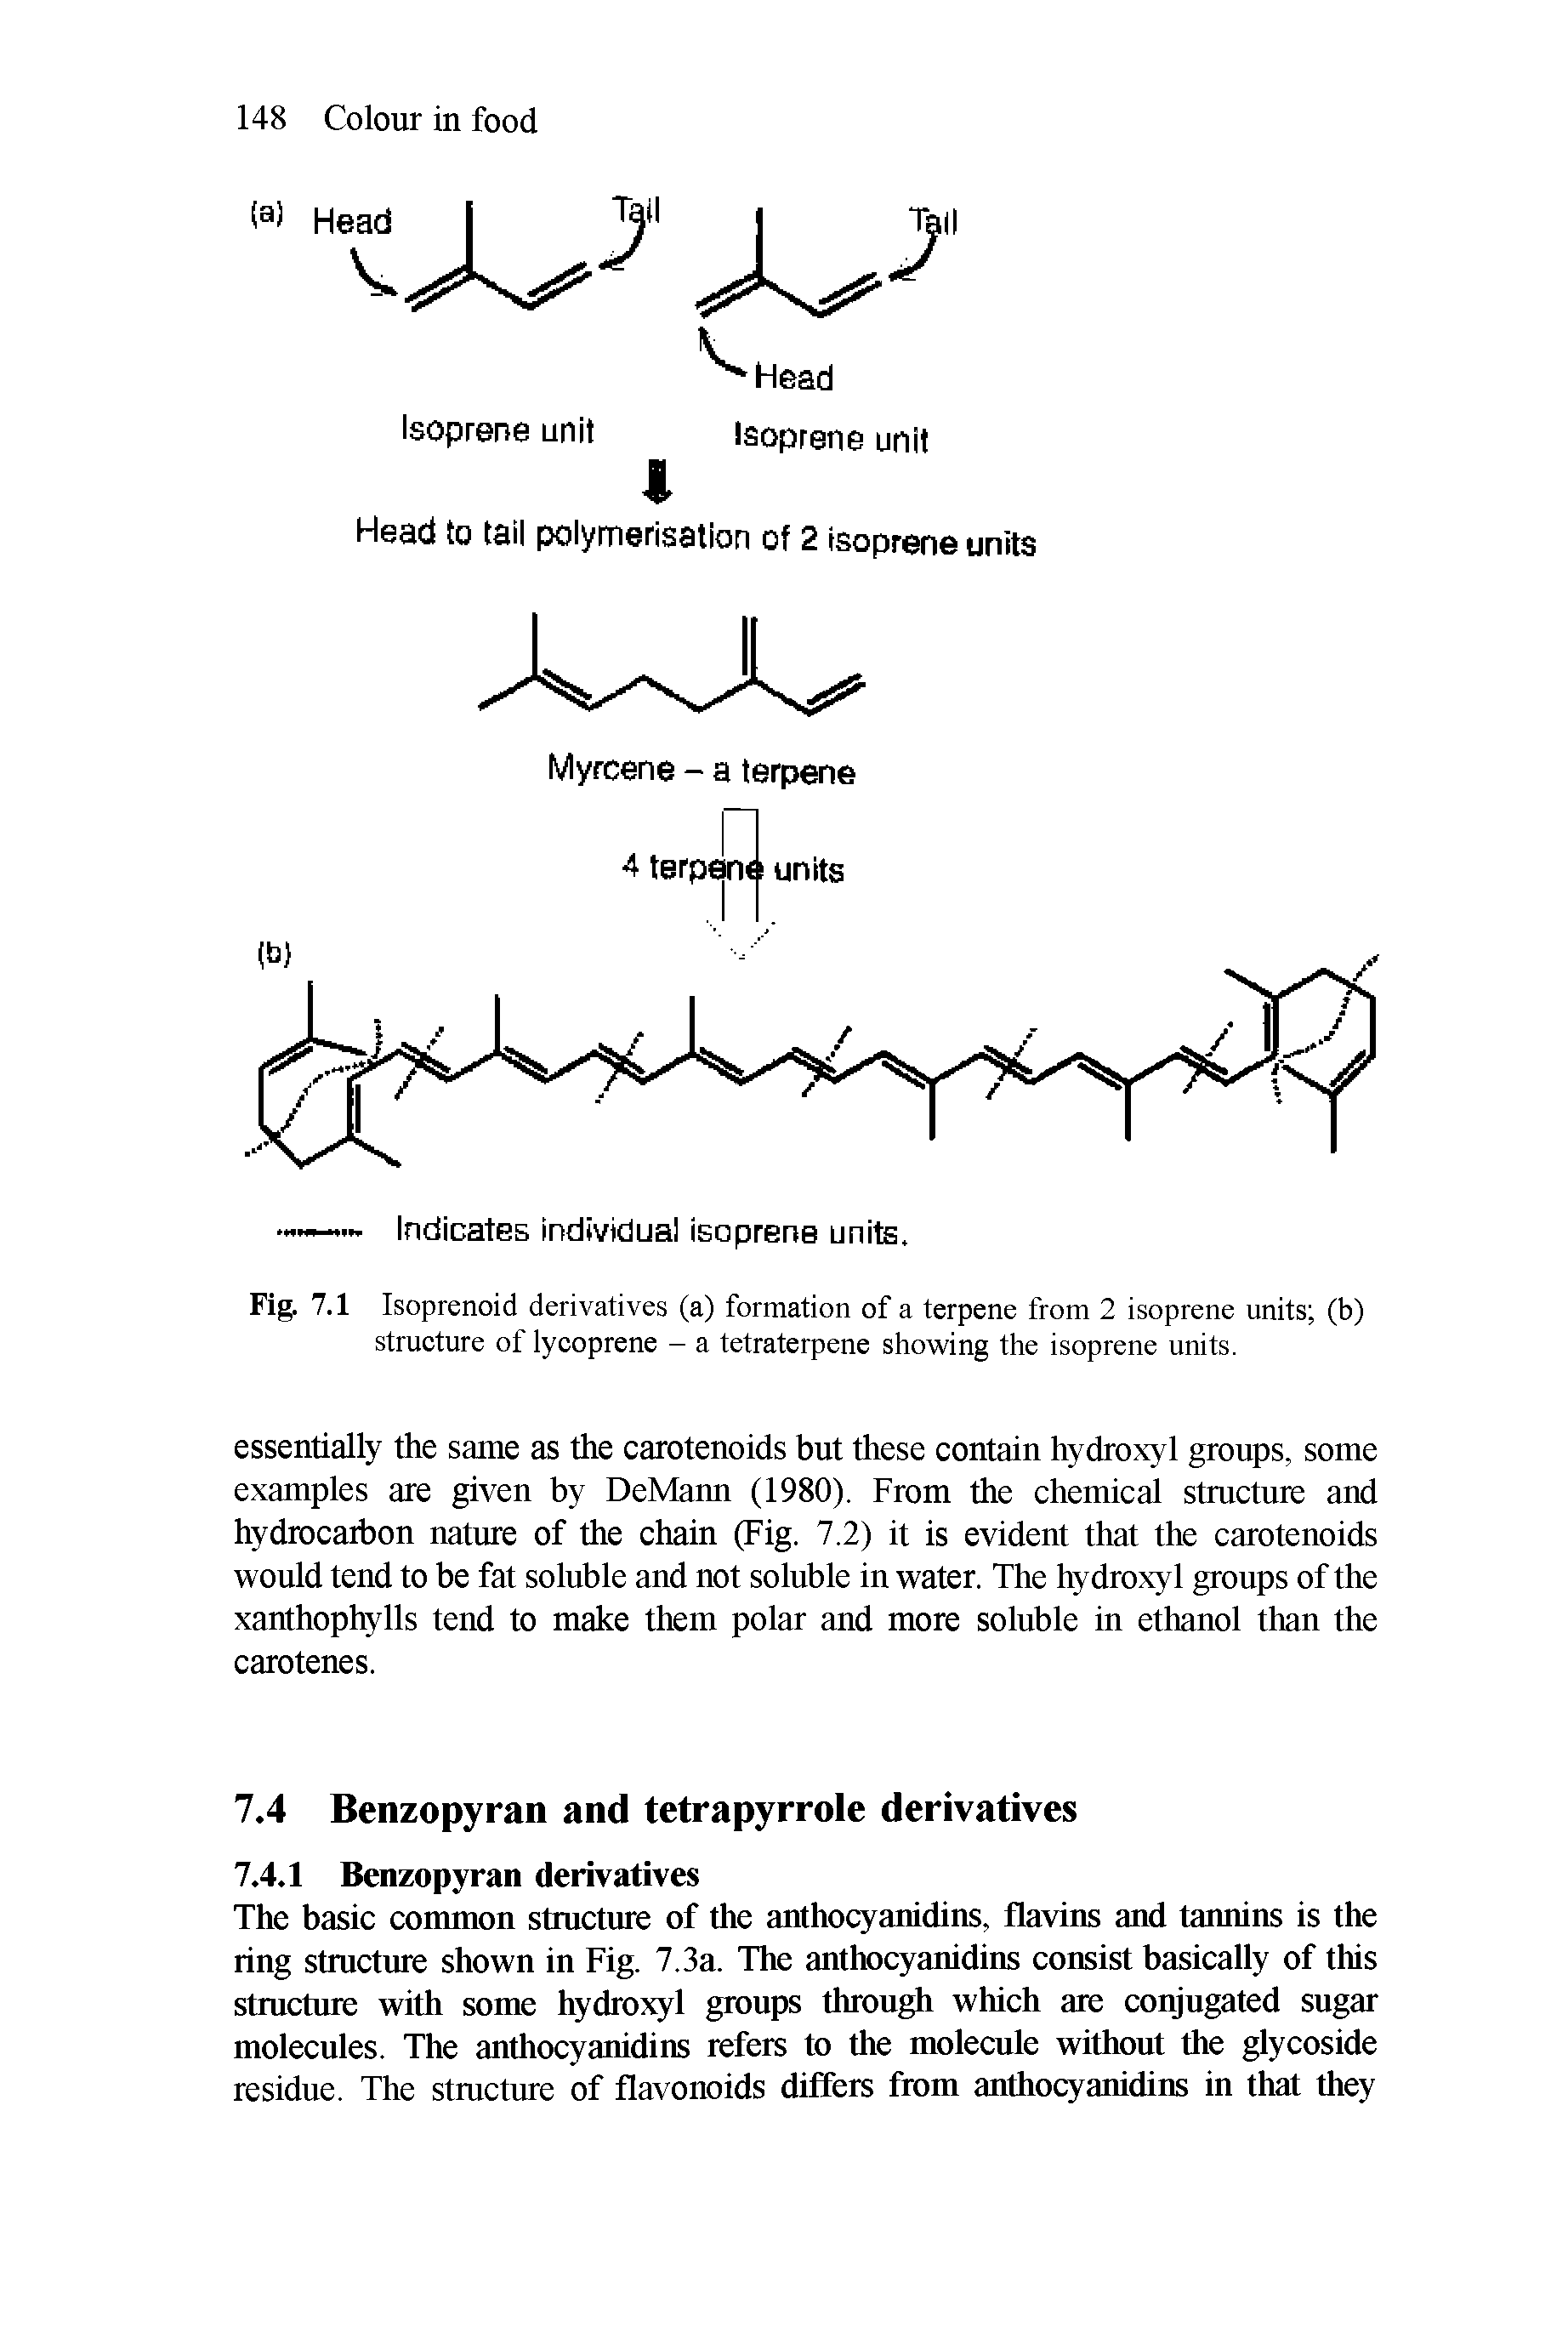 Fig. 7.1 Isoprenoid derivatives (a) formation of a terpene from 2 isoprene units (b) structure of lycoprene - a tetraterpene showing the isoprene units.